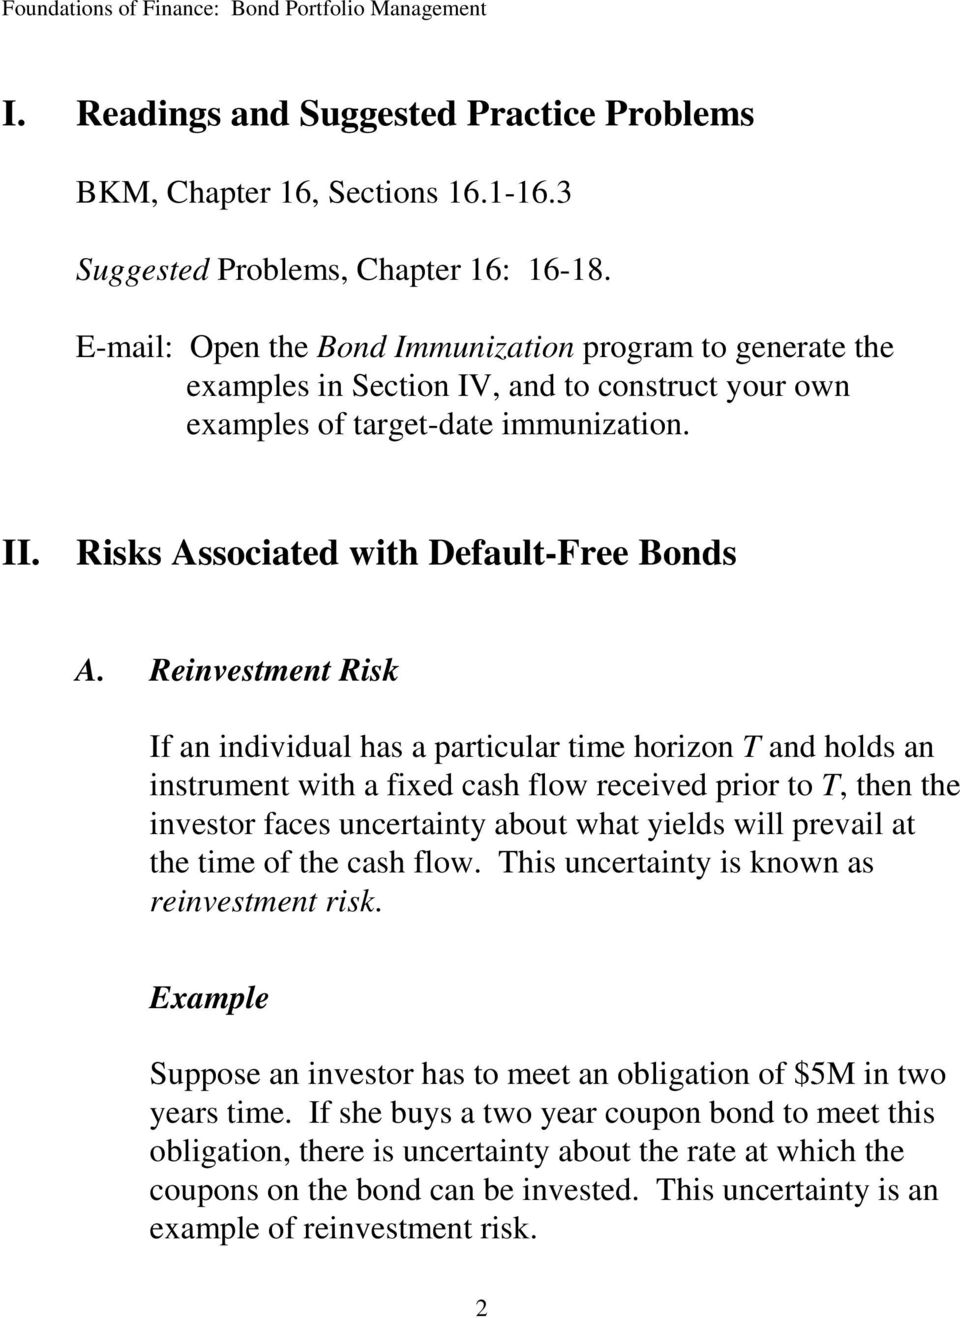 Reinvestment Risk If an individual has a particular time horizon T and holds an instrument with a fixed cash flow received prior to T, then the investor faces uncertainty about what yields will